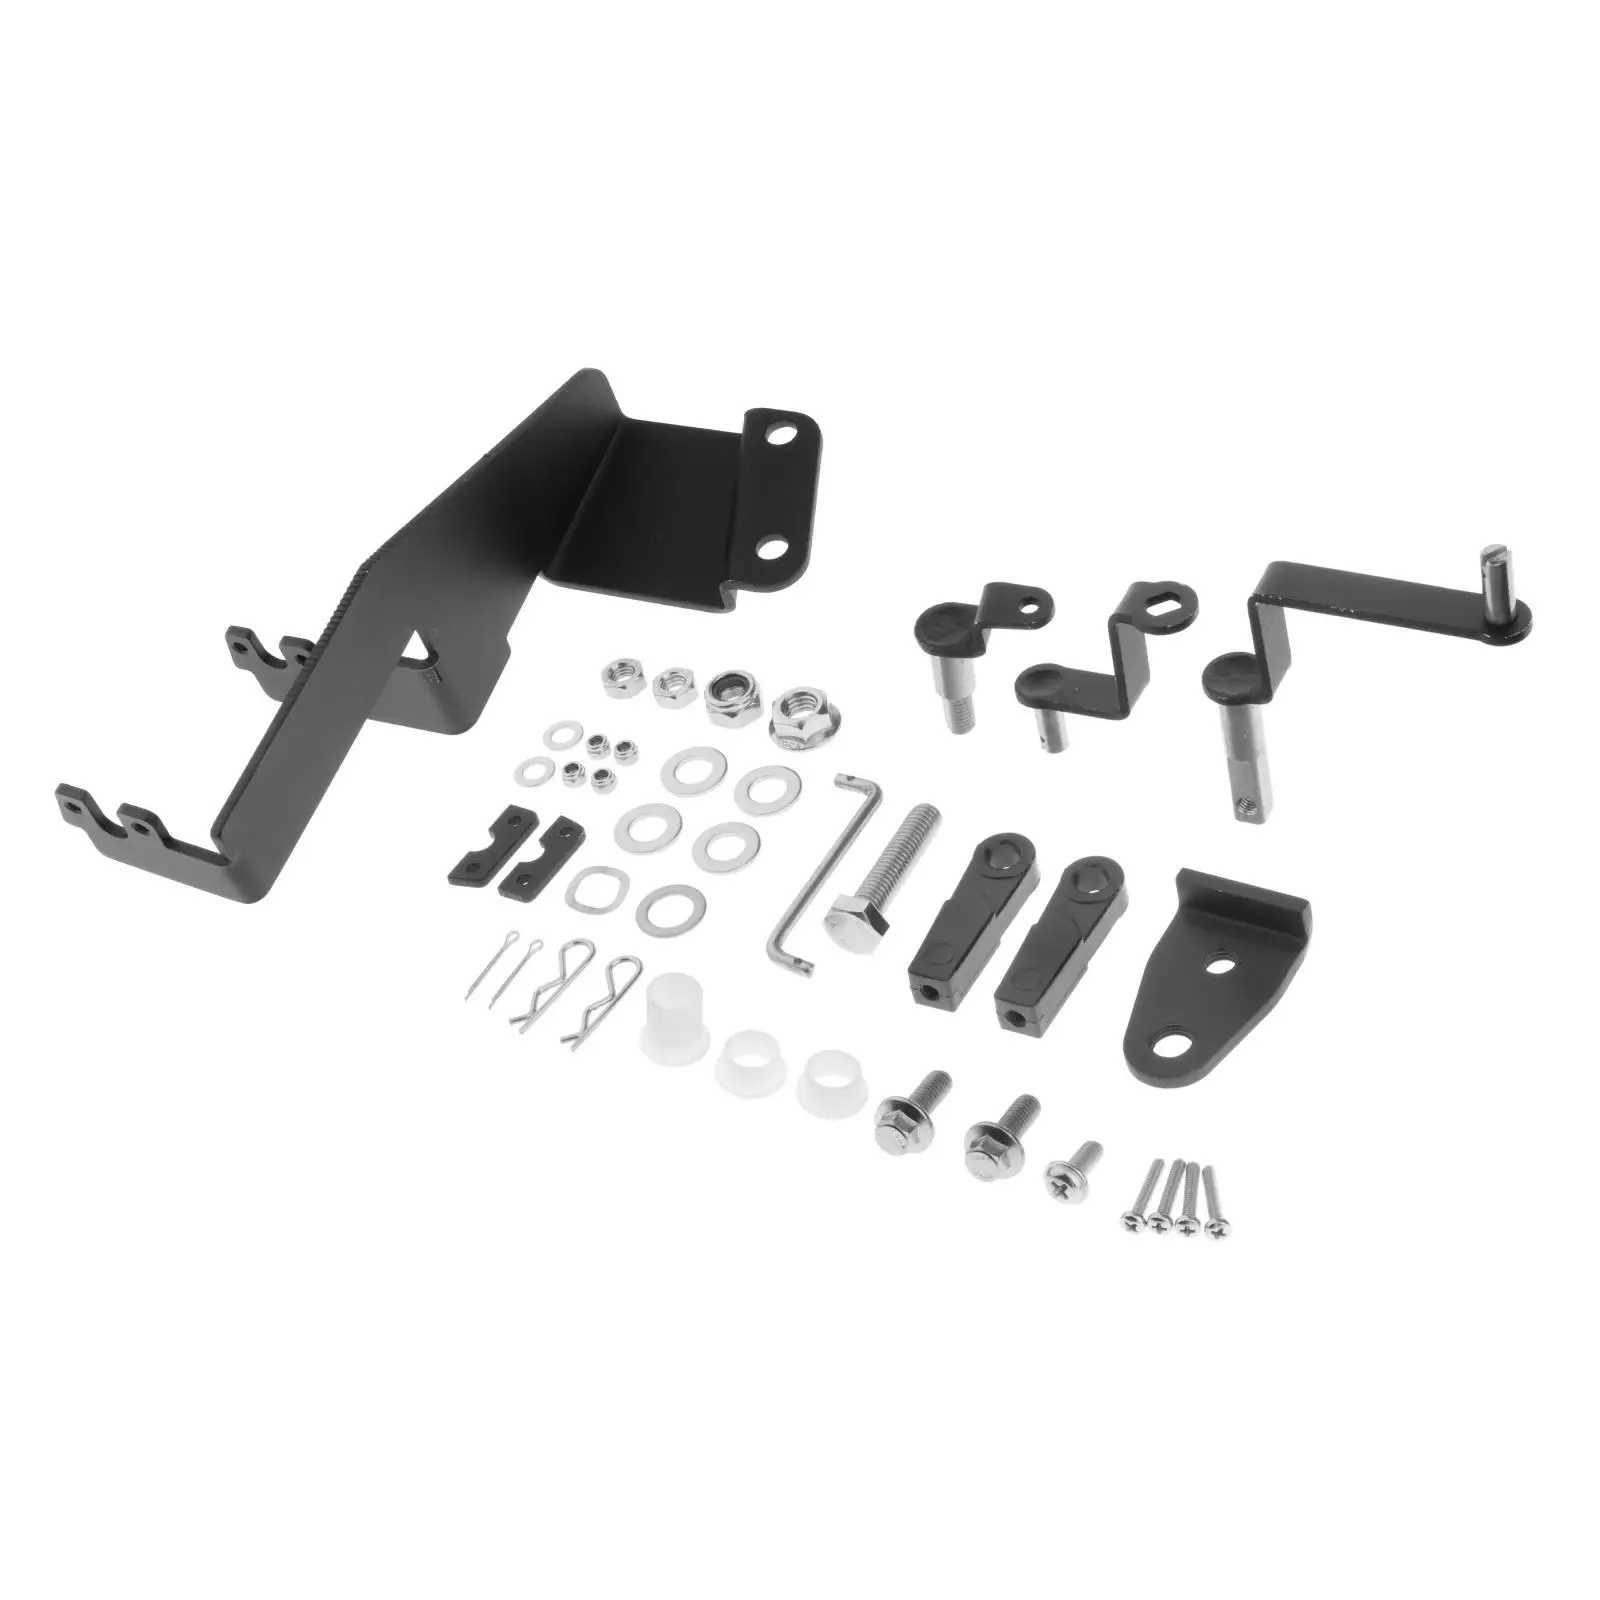 High Quality Replacement Remote Control Attachment Kit For Yamaha Outboard 9.9HP Sea 63V-48501-00 D-Modern